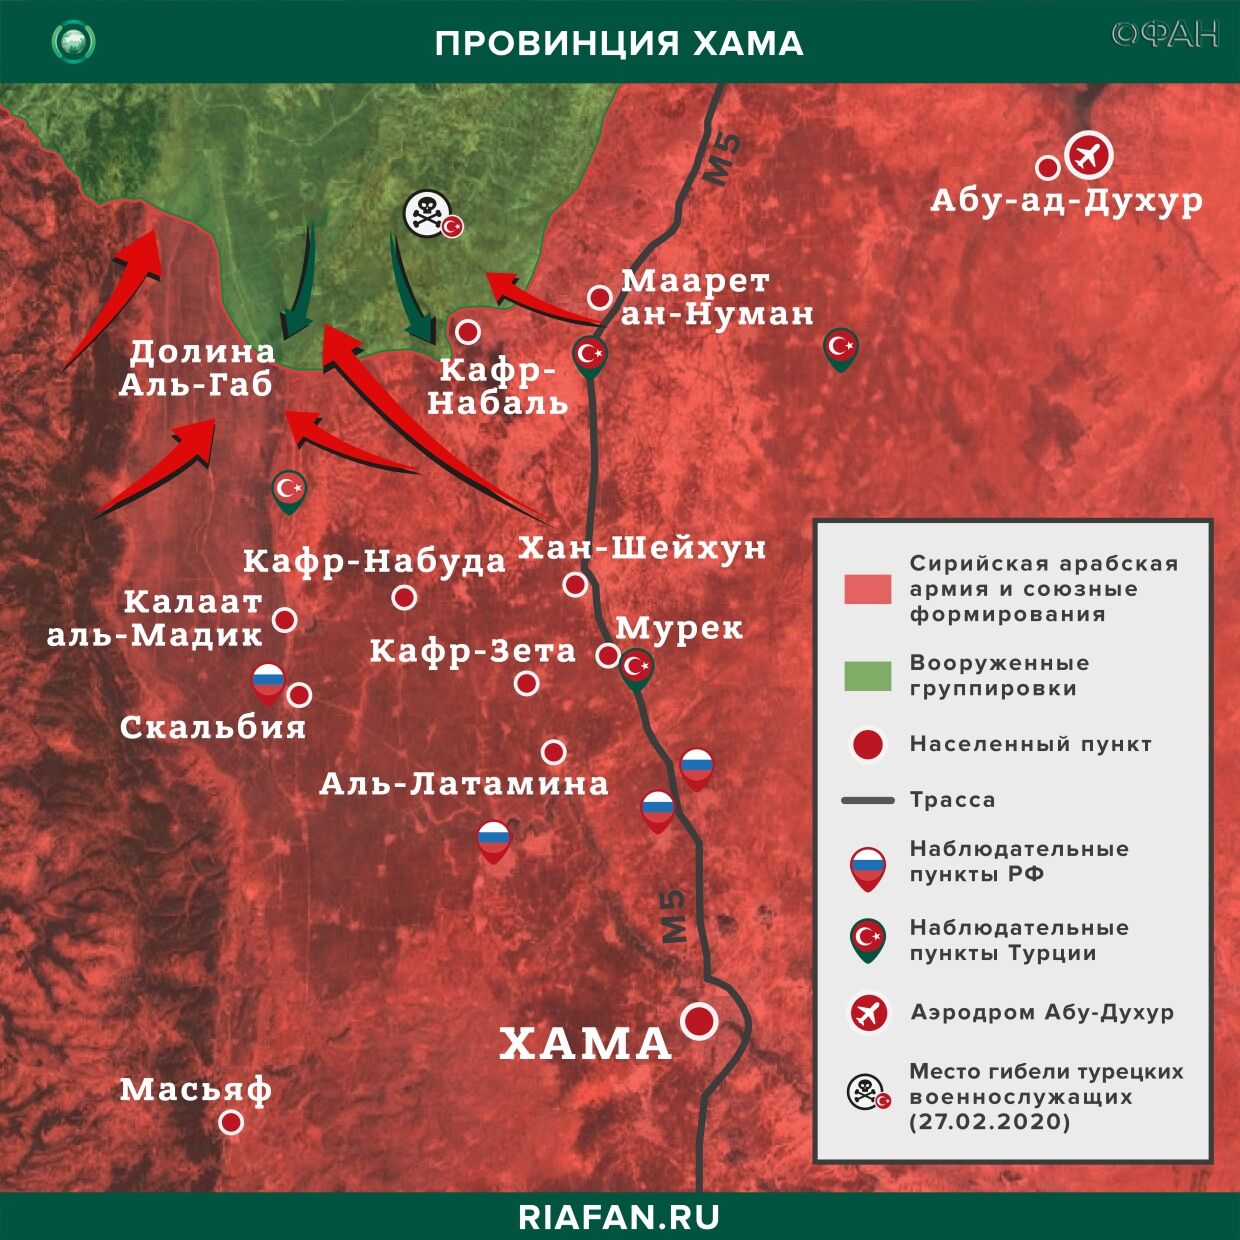 Syria the results of the day on 22 April 06.00: Israel tried to hit Homs, HTSH obstructs patrolling of Turkey and the Russian Federation in Idlib